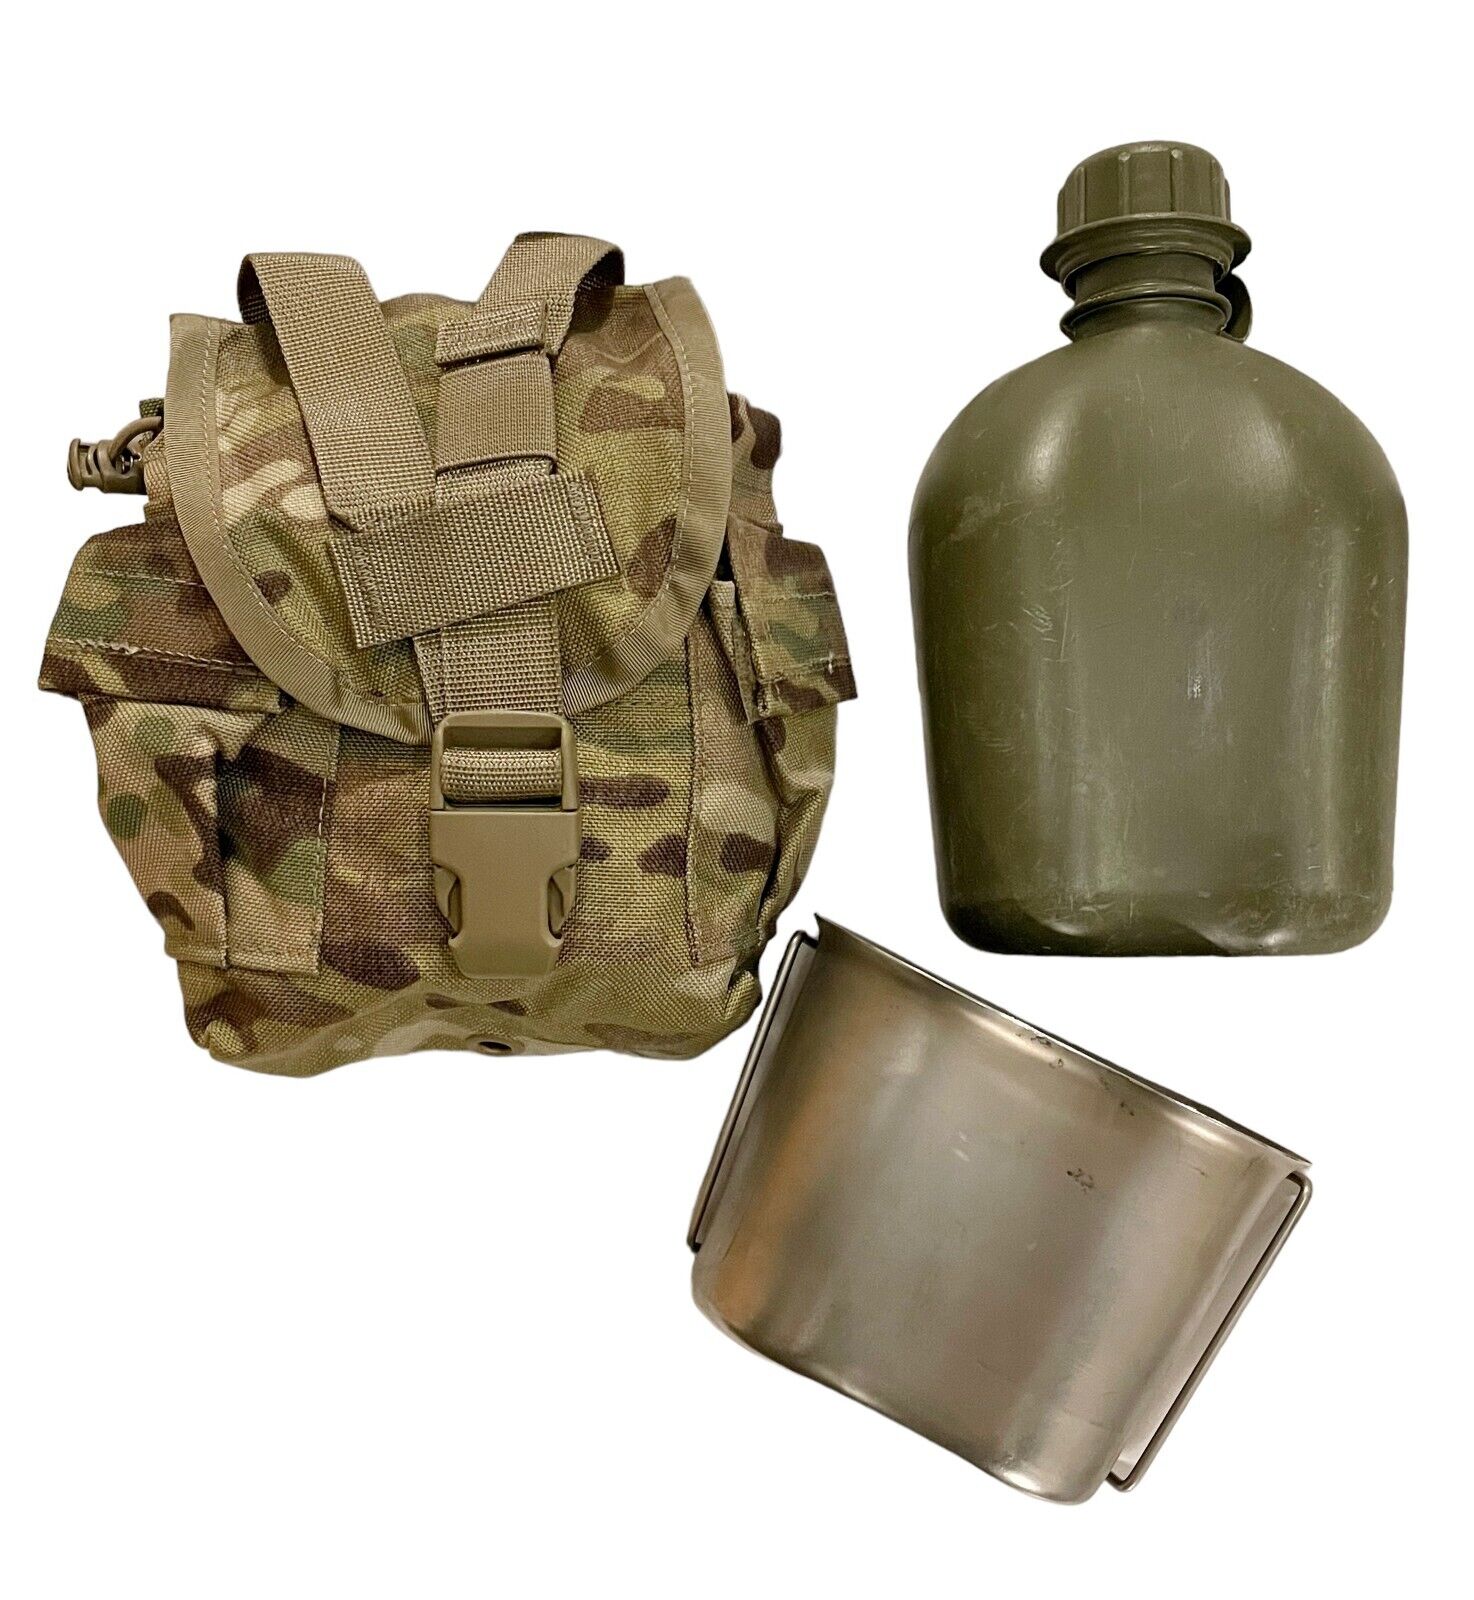 USGI OCP OEF-CP Multicam Molle II Pouch, 1QT Canteen & Cup Set EXC Condition